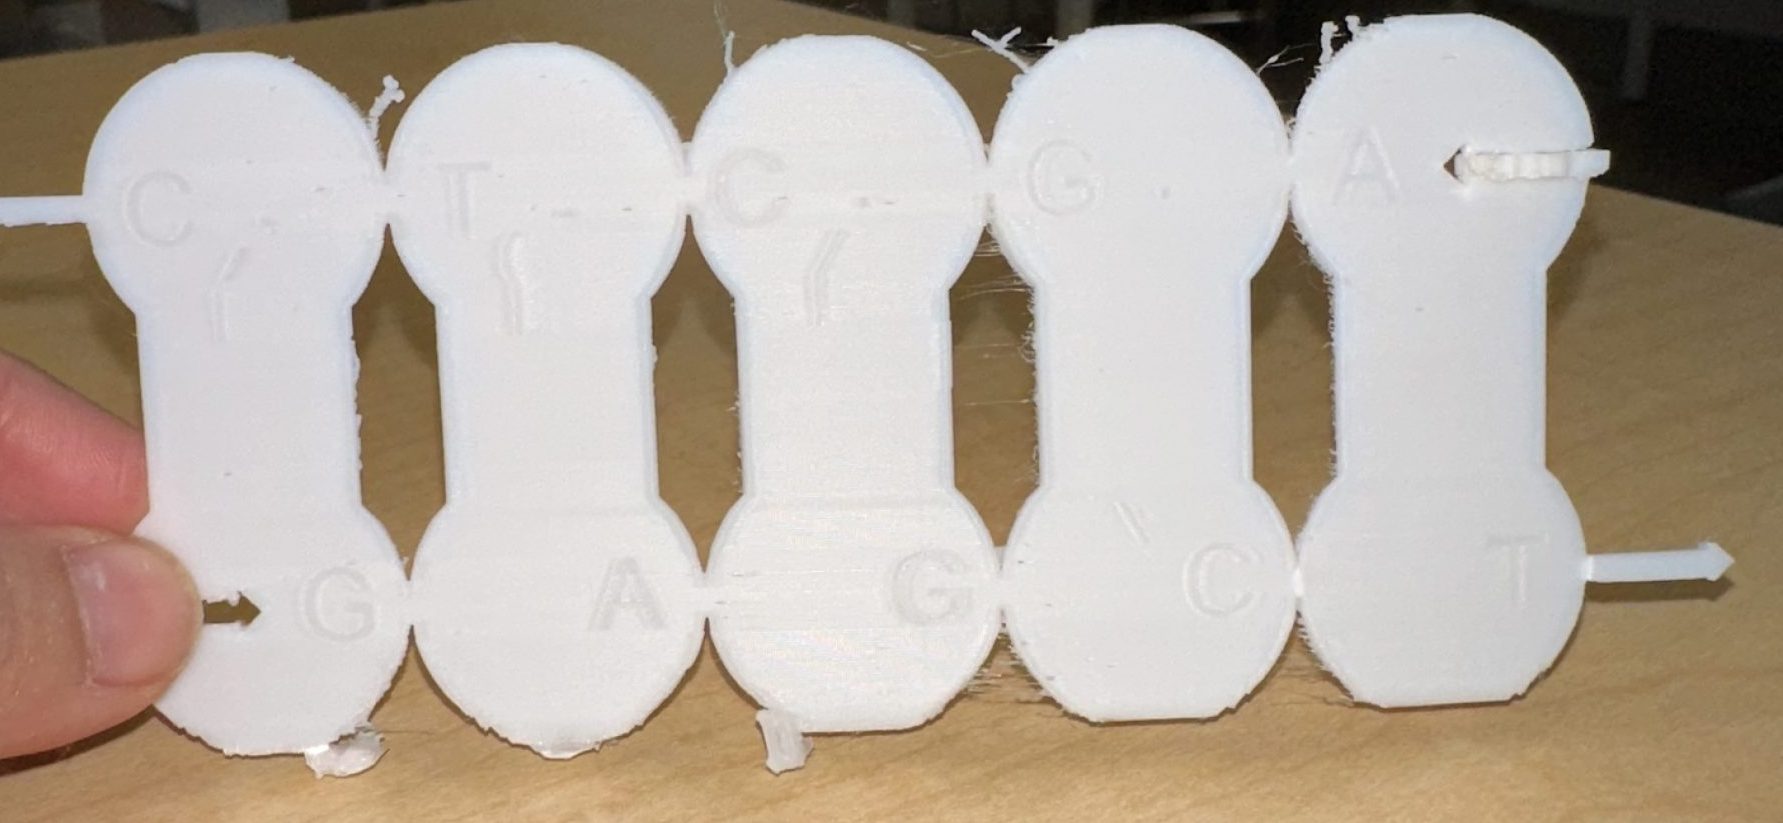 3D printed front view of the DNA replication bubble.